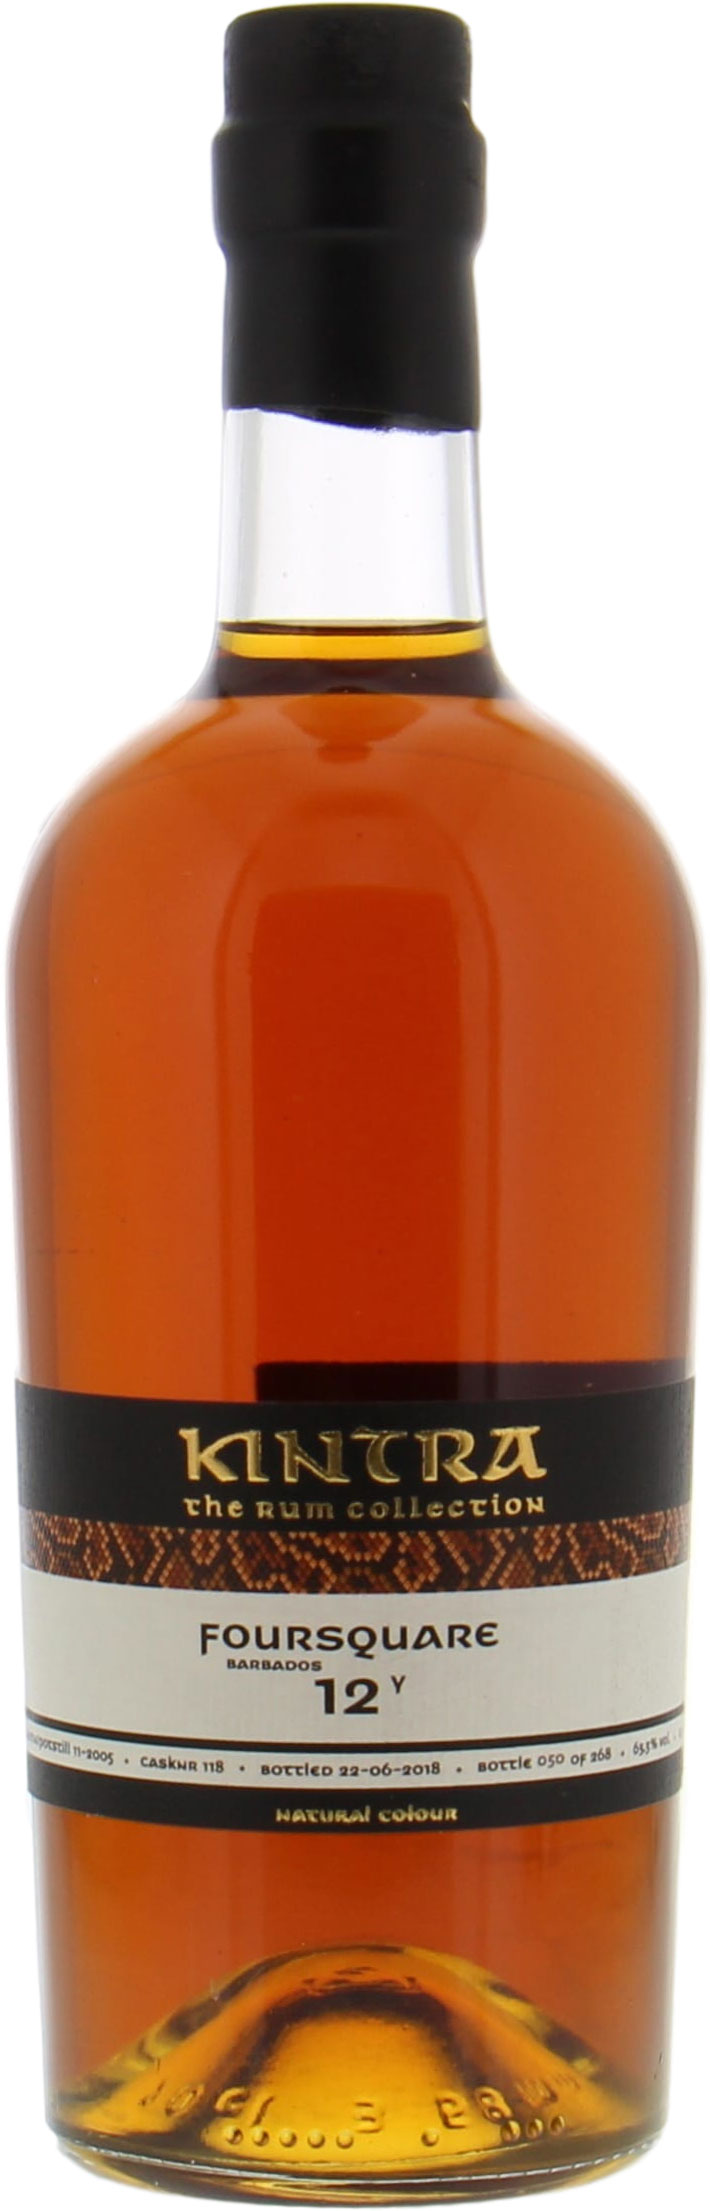 Foursquare - 12 Years Old KINTRA Cask 118 63.3% 2006 Perfect